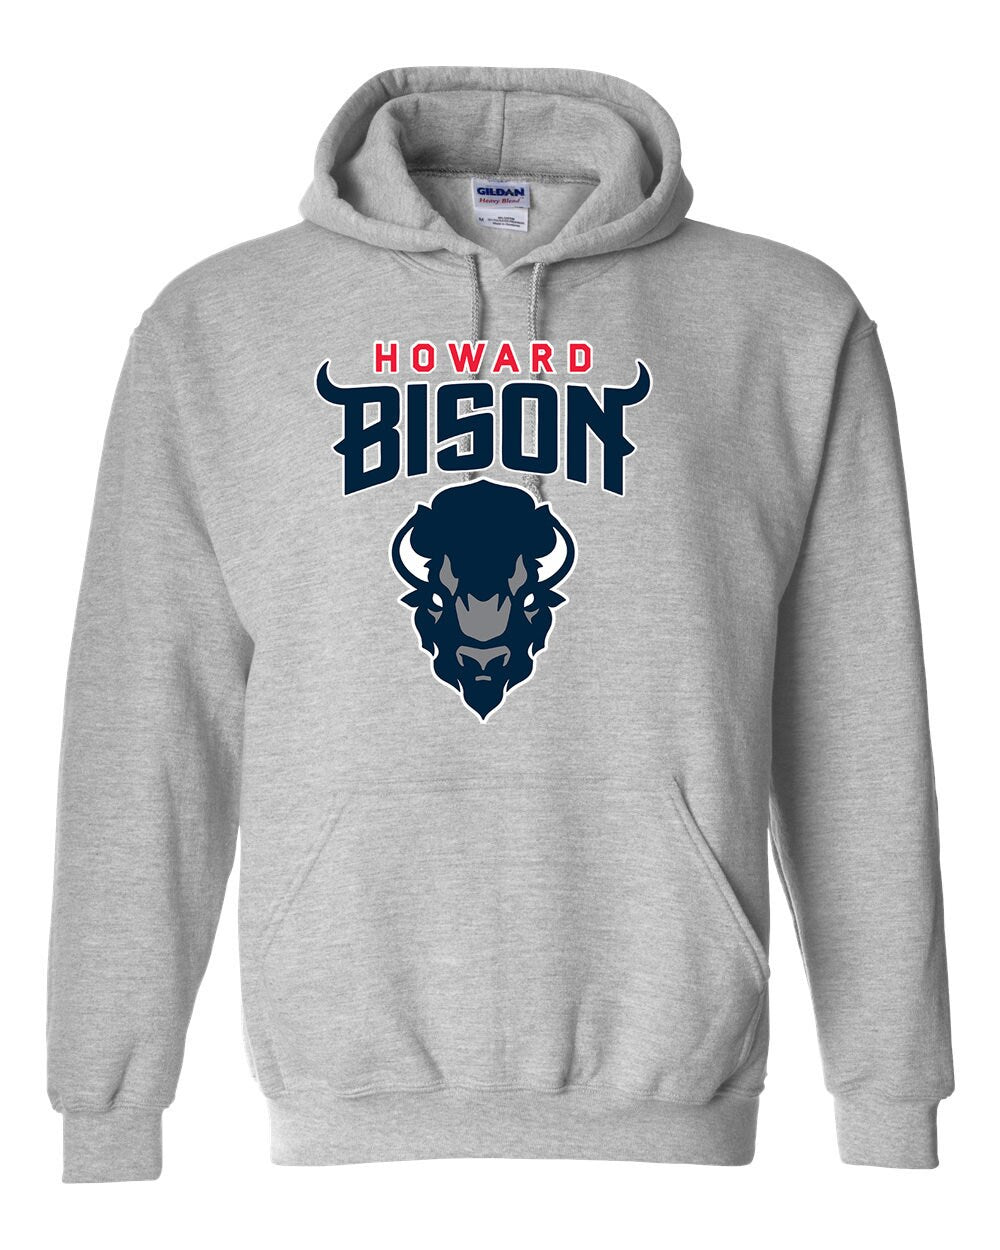 Howard University Bison Hoodie: Embrace the Strength and Pride of your HBCU